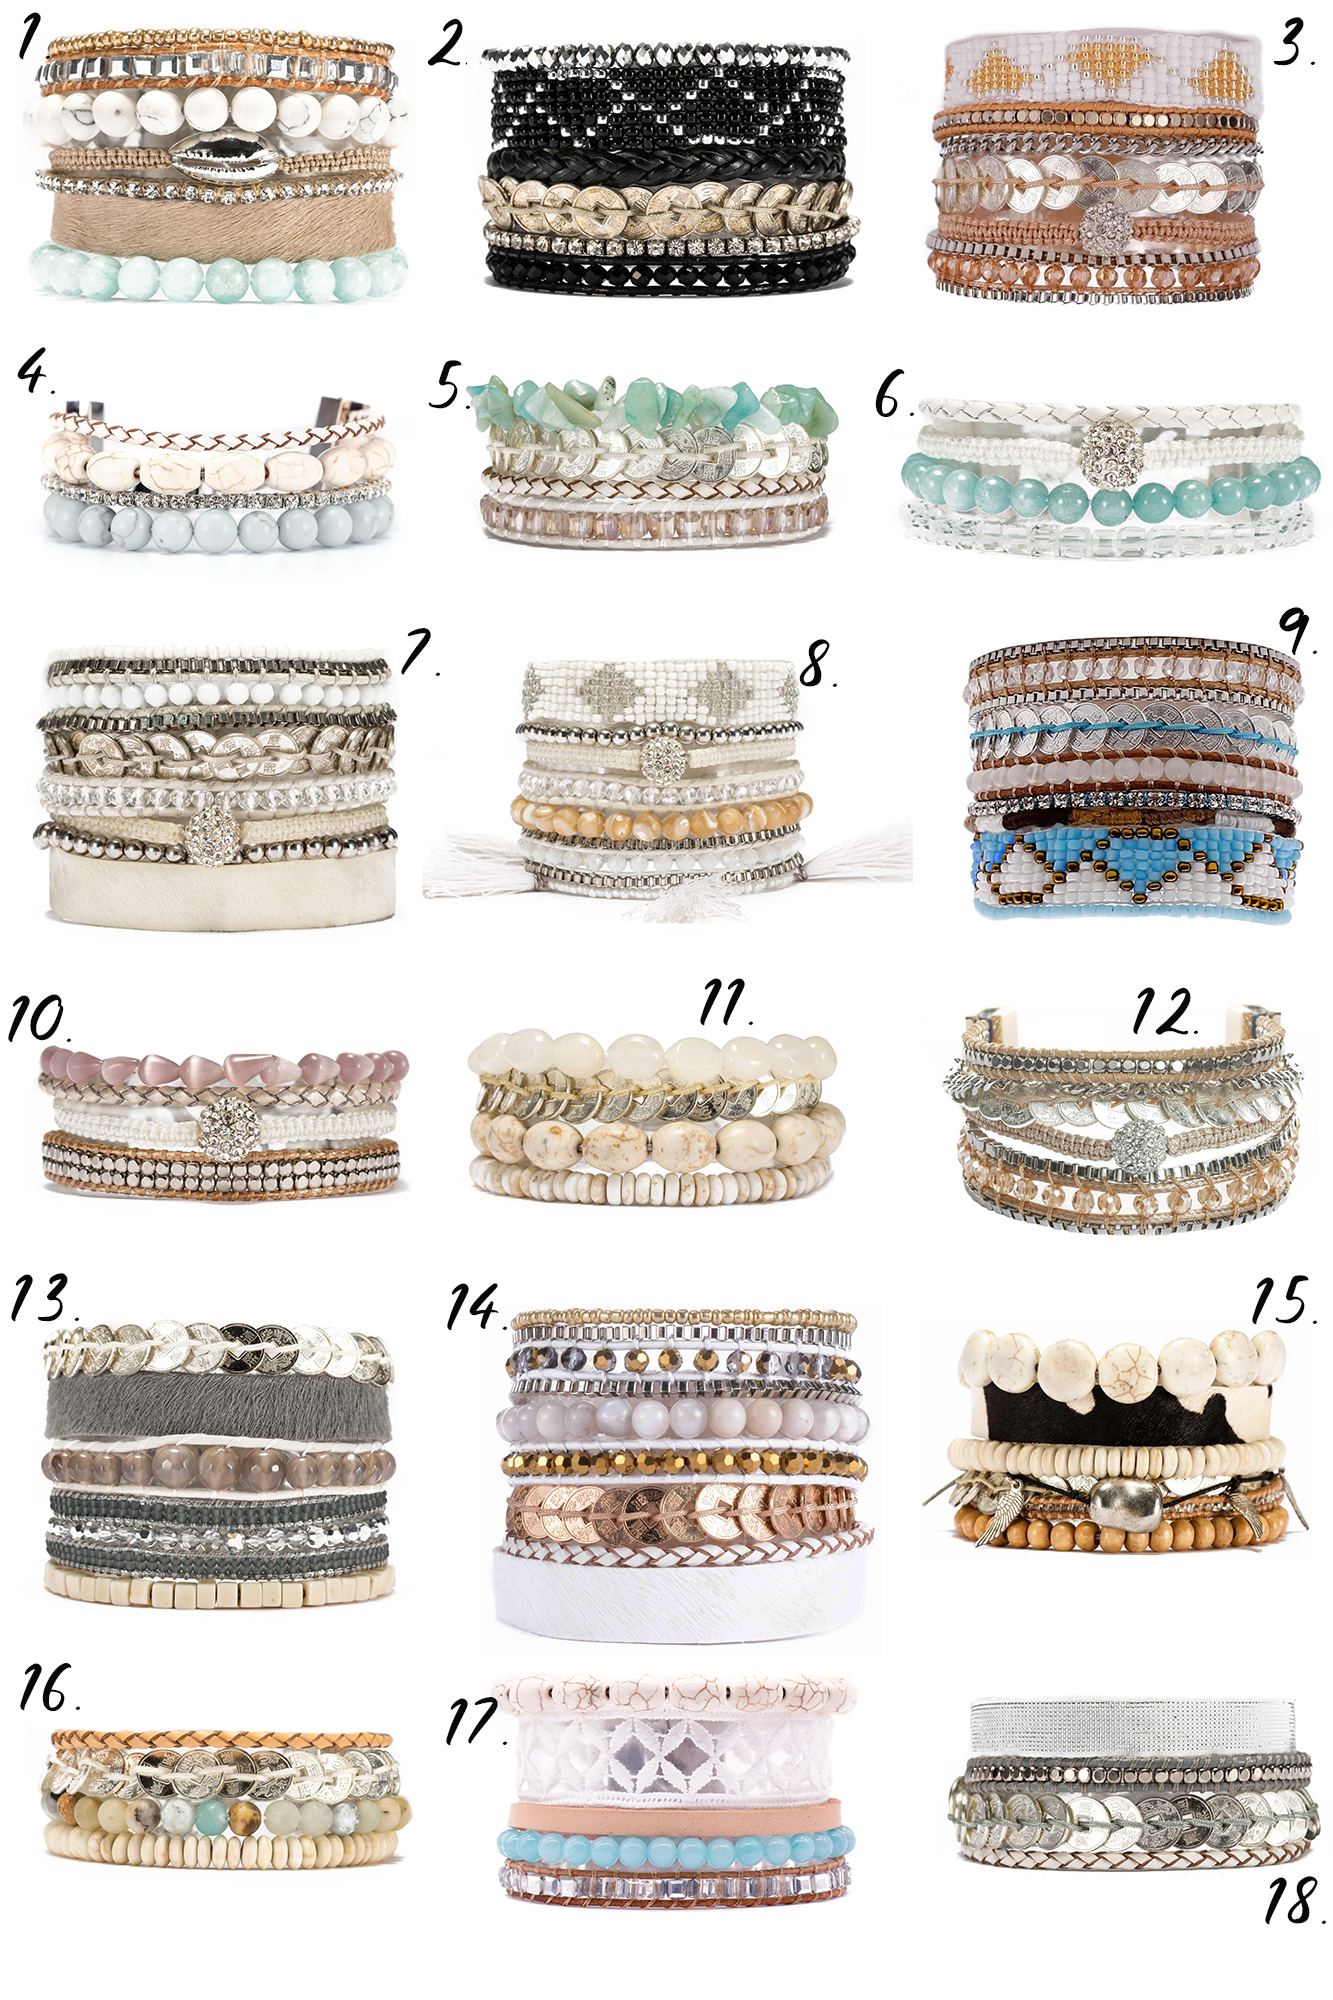 Wrap Bracelet Obsessed - Victoria Emerson Wrap Bracelets & Boho Cuff Bracelet Reviews.. I rounded up my favorite summer accessories!